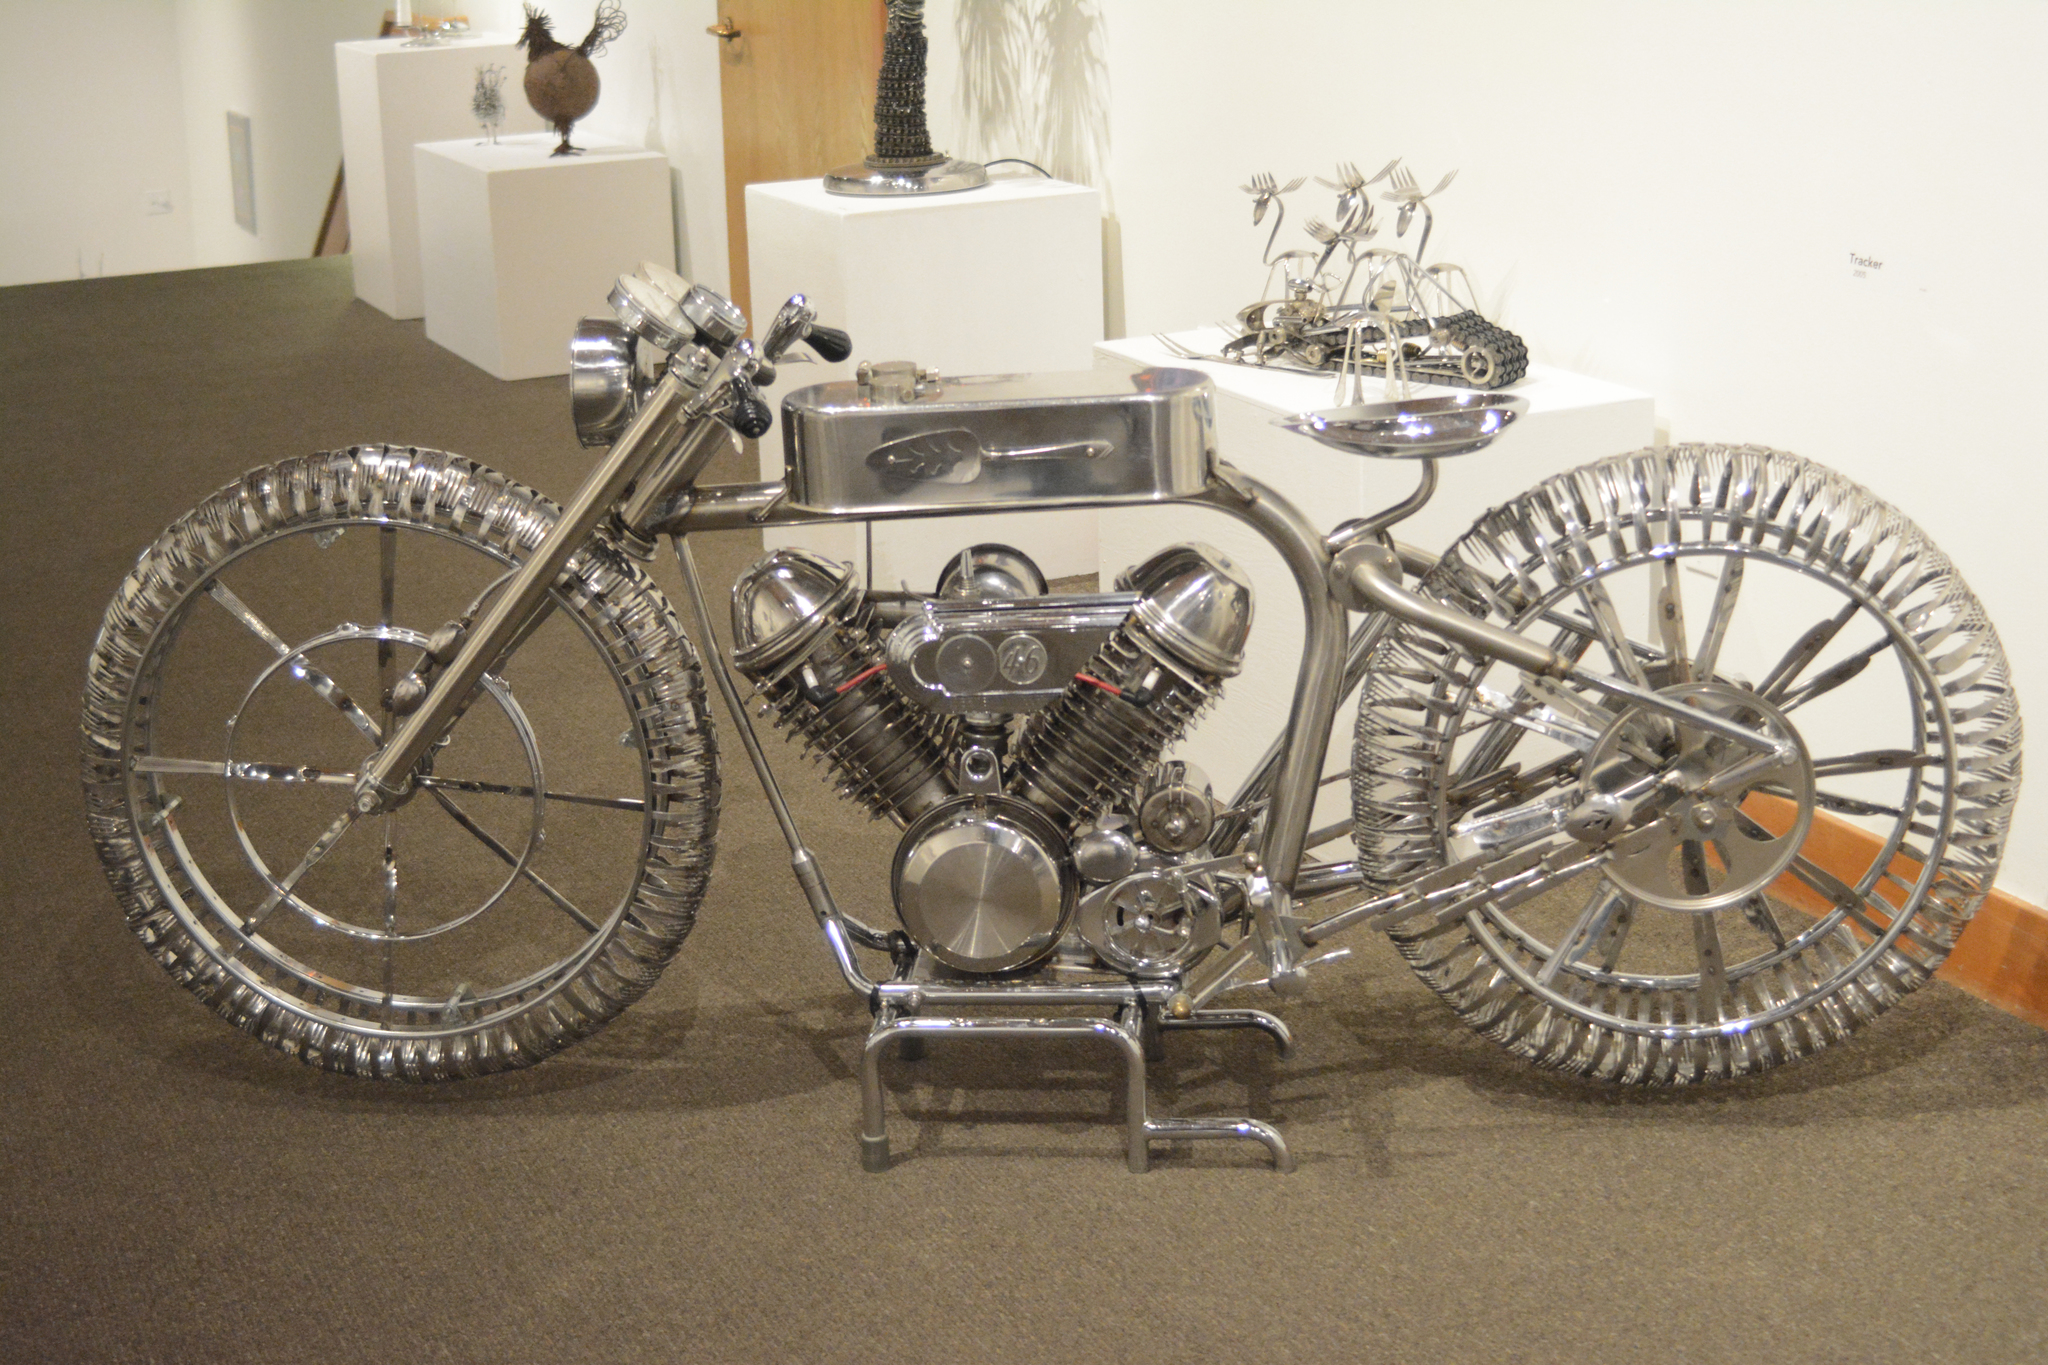 Photo by Michael Armstrong, Homer News  Don Henry’s Tracker and four other motorcycle sculptures he created from all kinds of found objects are now on display at the Pratt Museum.